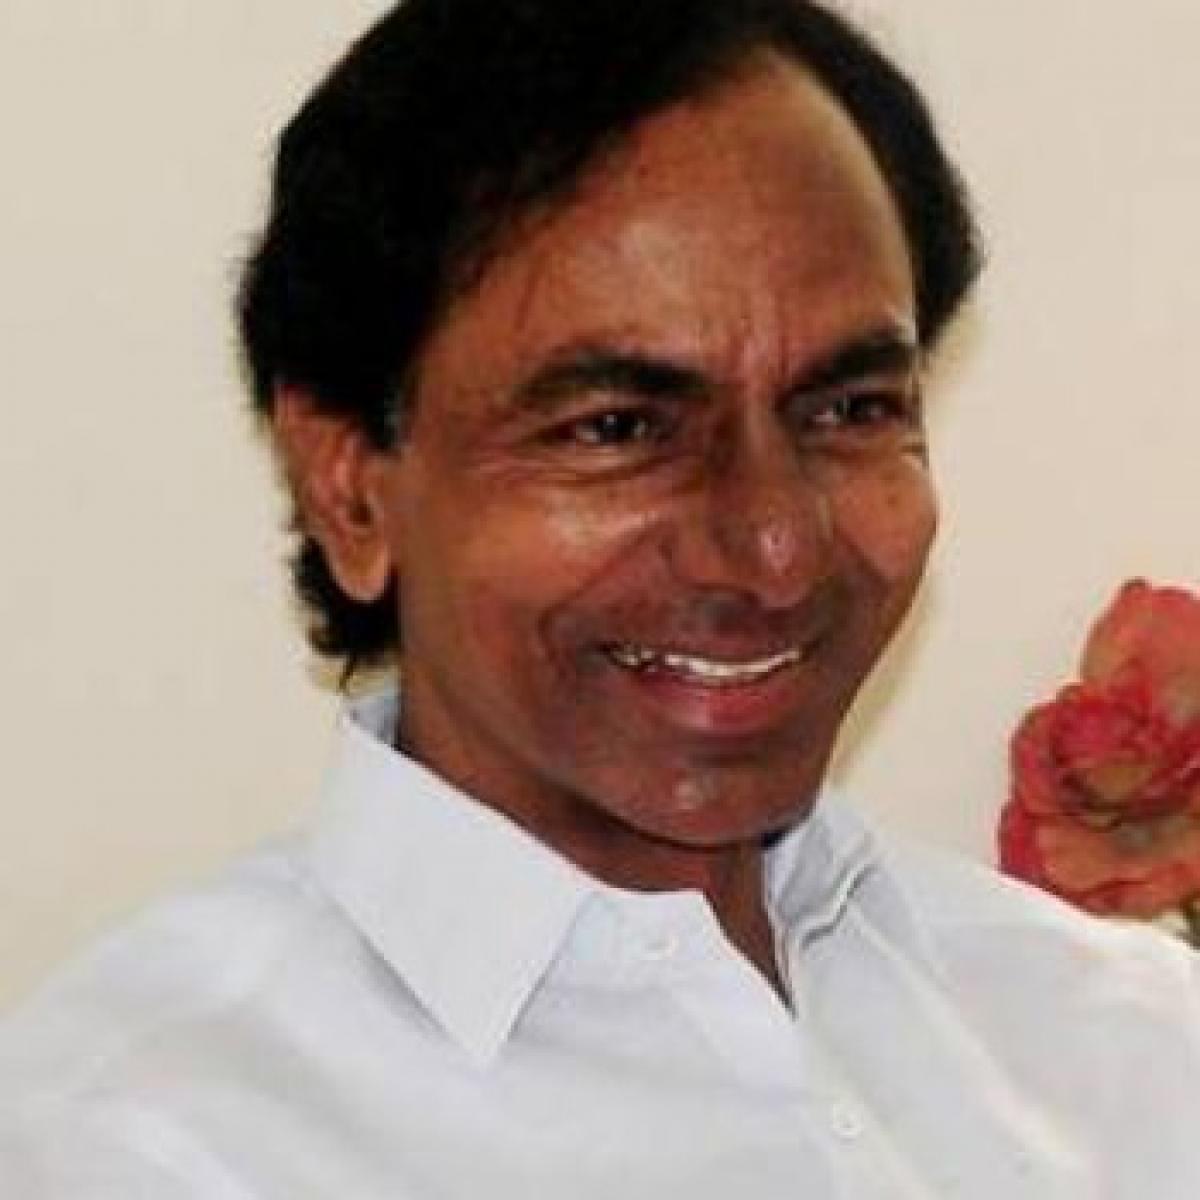 Nominated posts for TRS netas soon